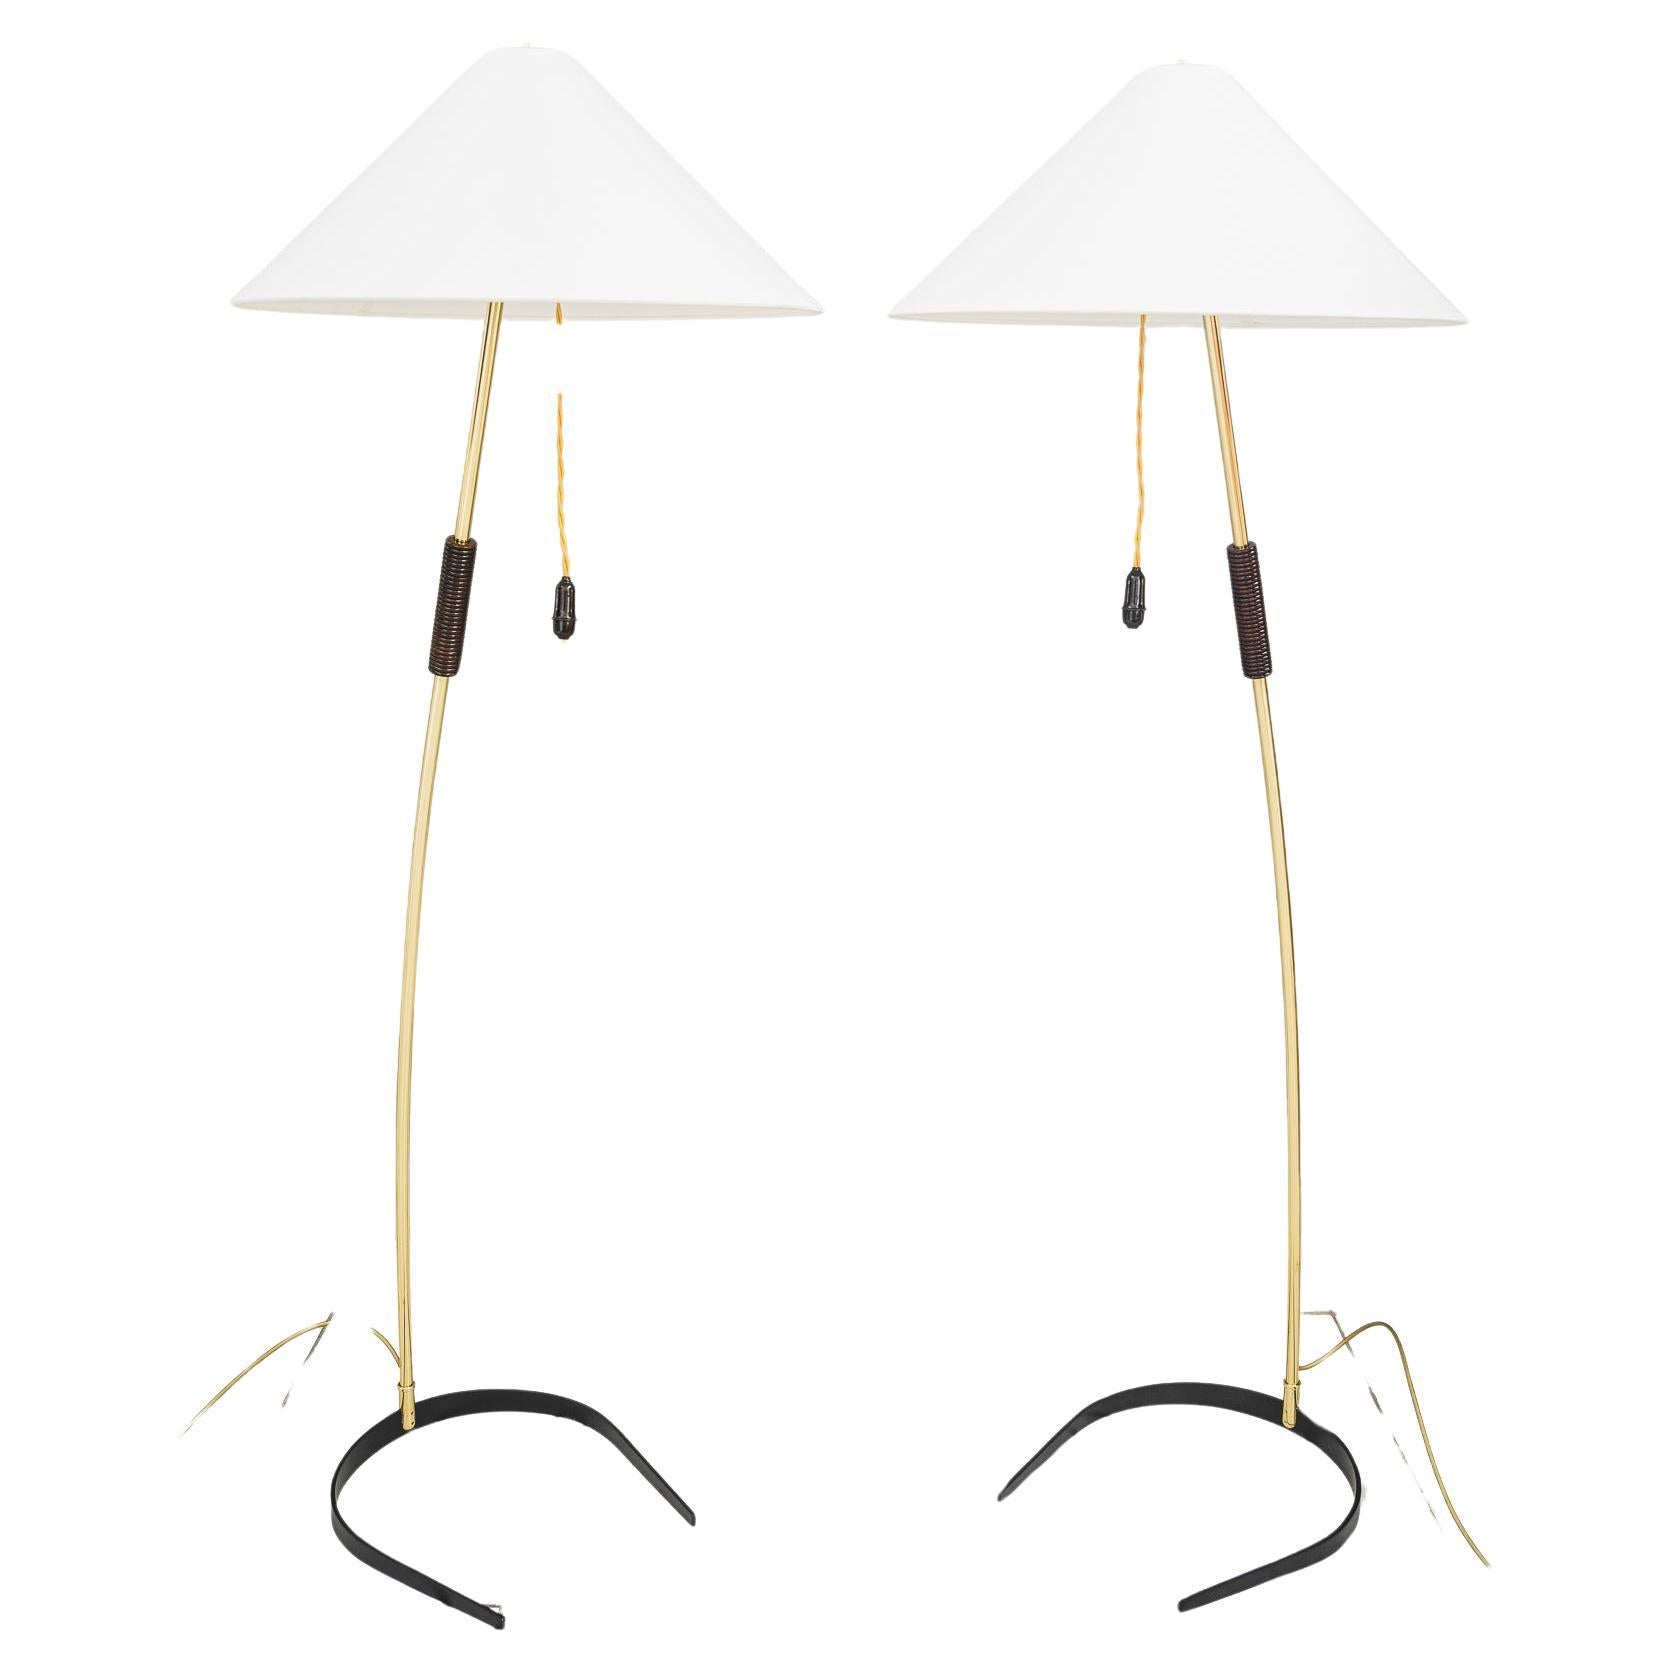 2x Rupert Nikoll Floor Lamps with Wood Handle, circa 1950s For Sale